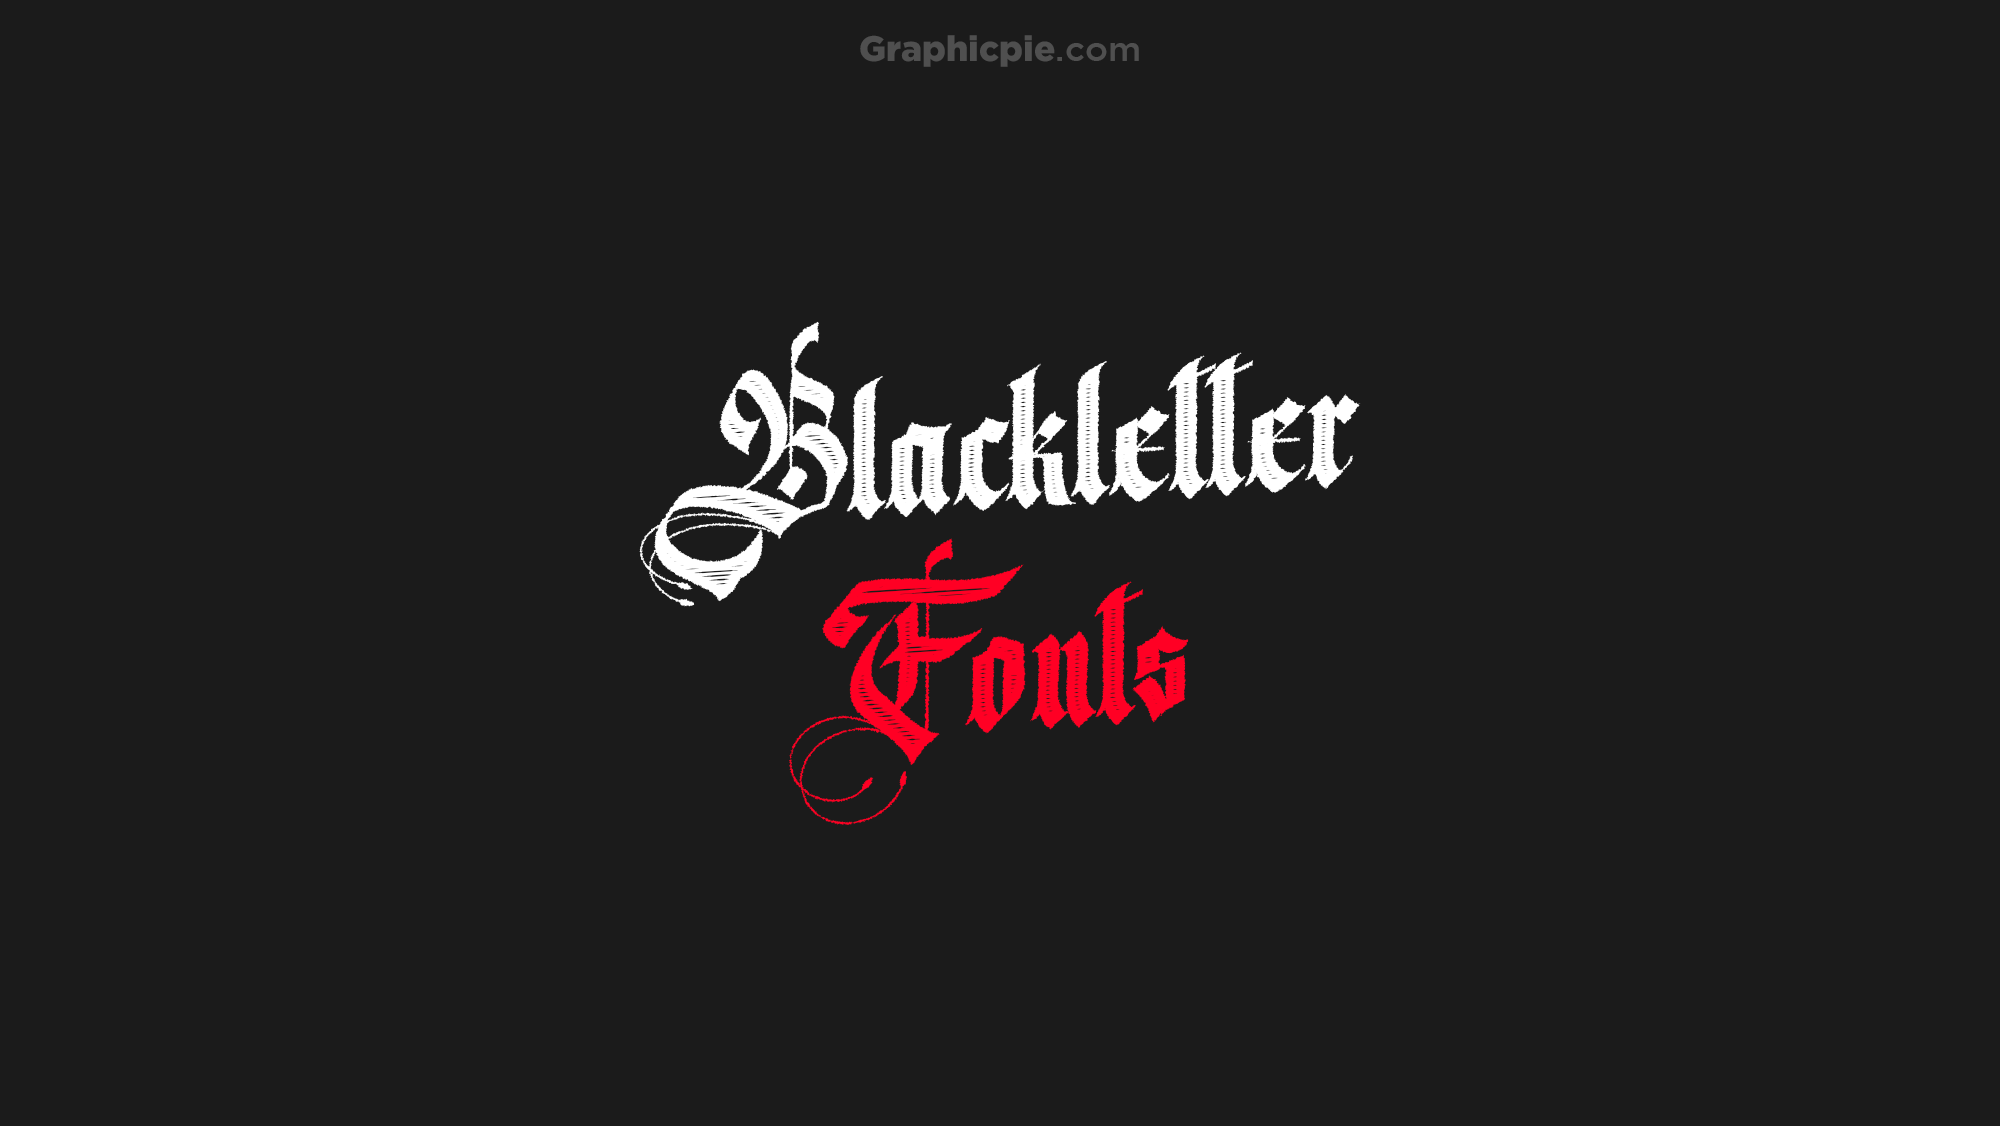 8-blackletter-fonts-you-can-find-on-google-docs-graphic-pie